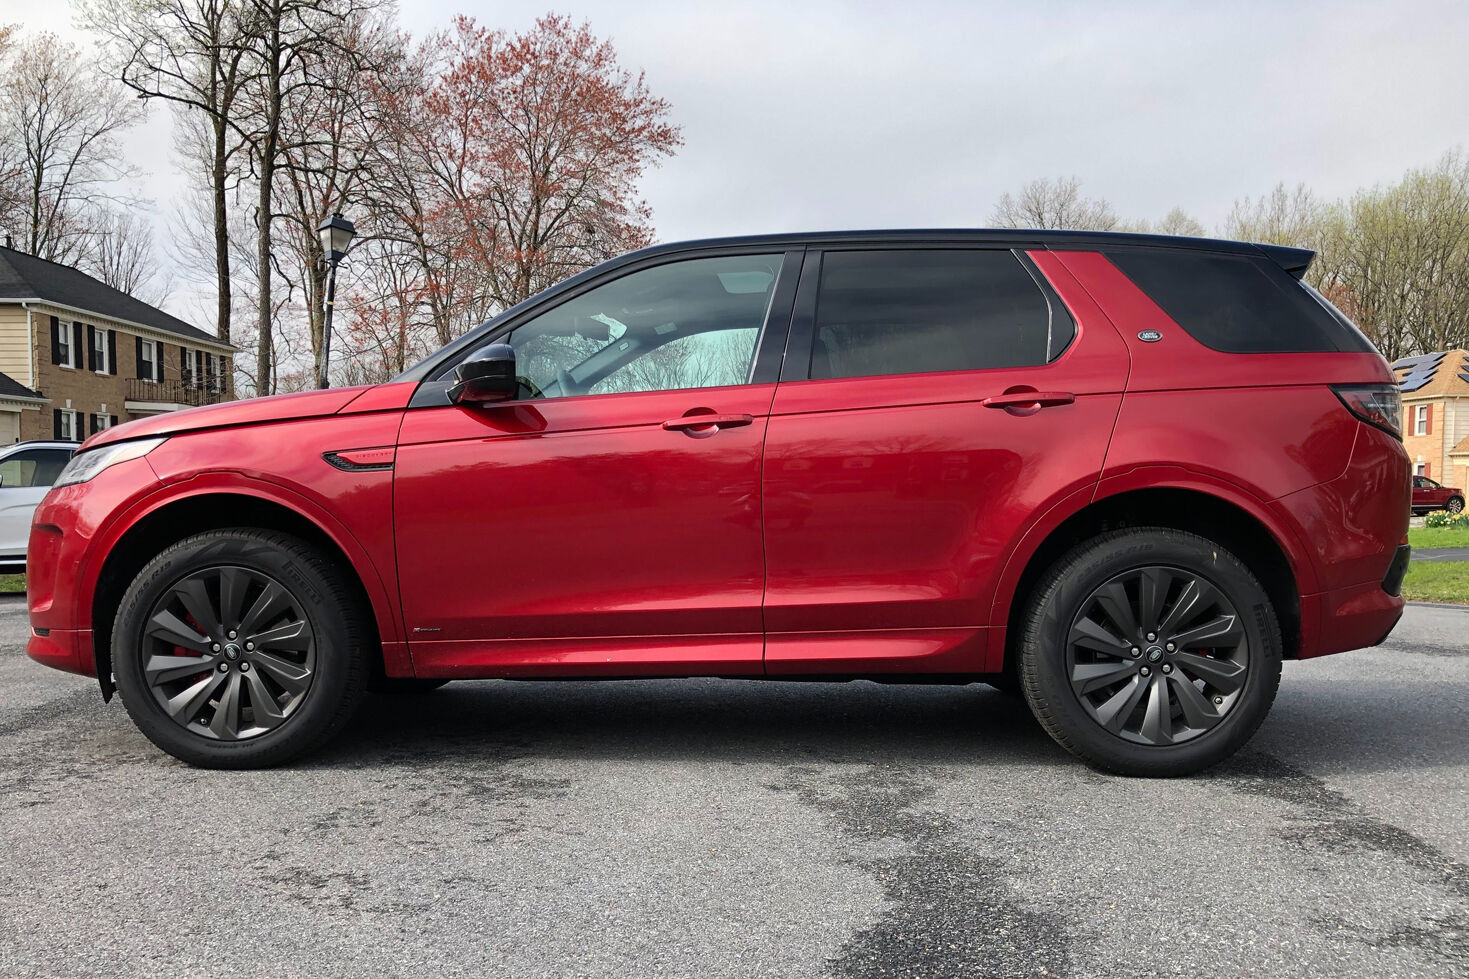 Car Review: 2020 Land Rover Discovery Sport is the compact luxury